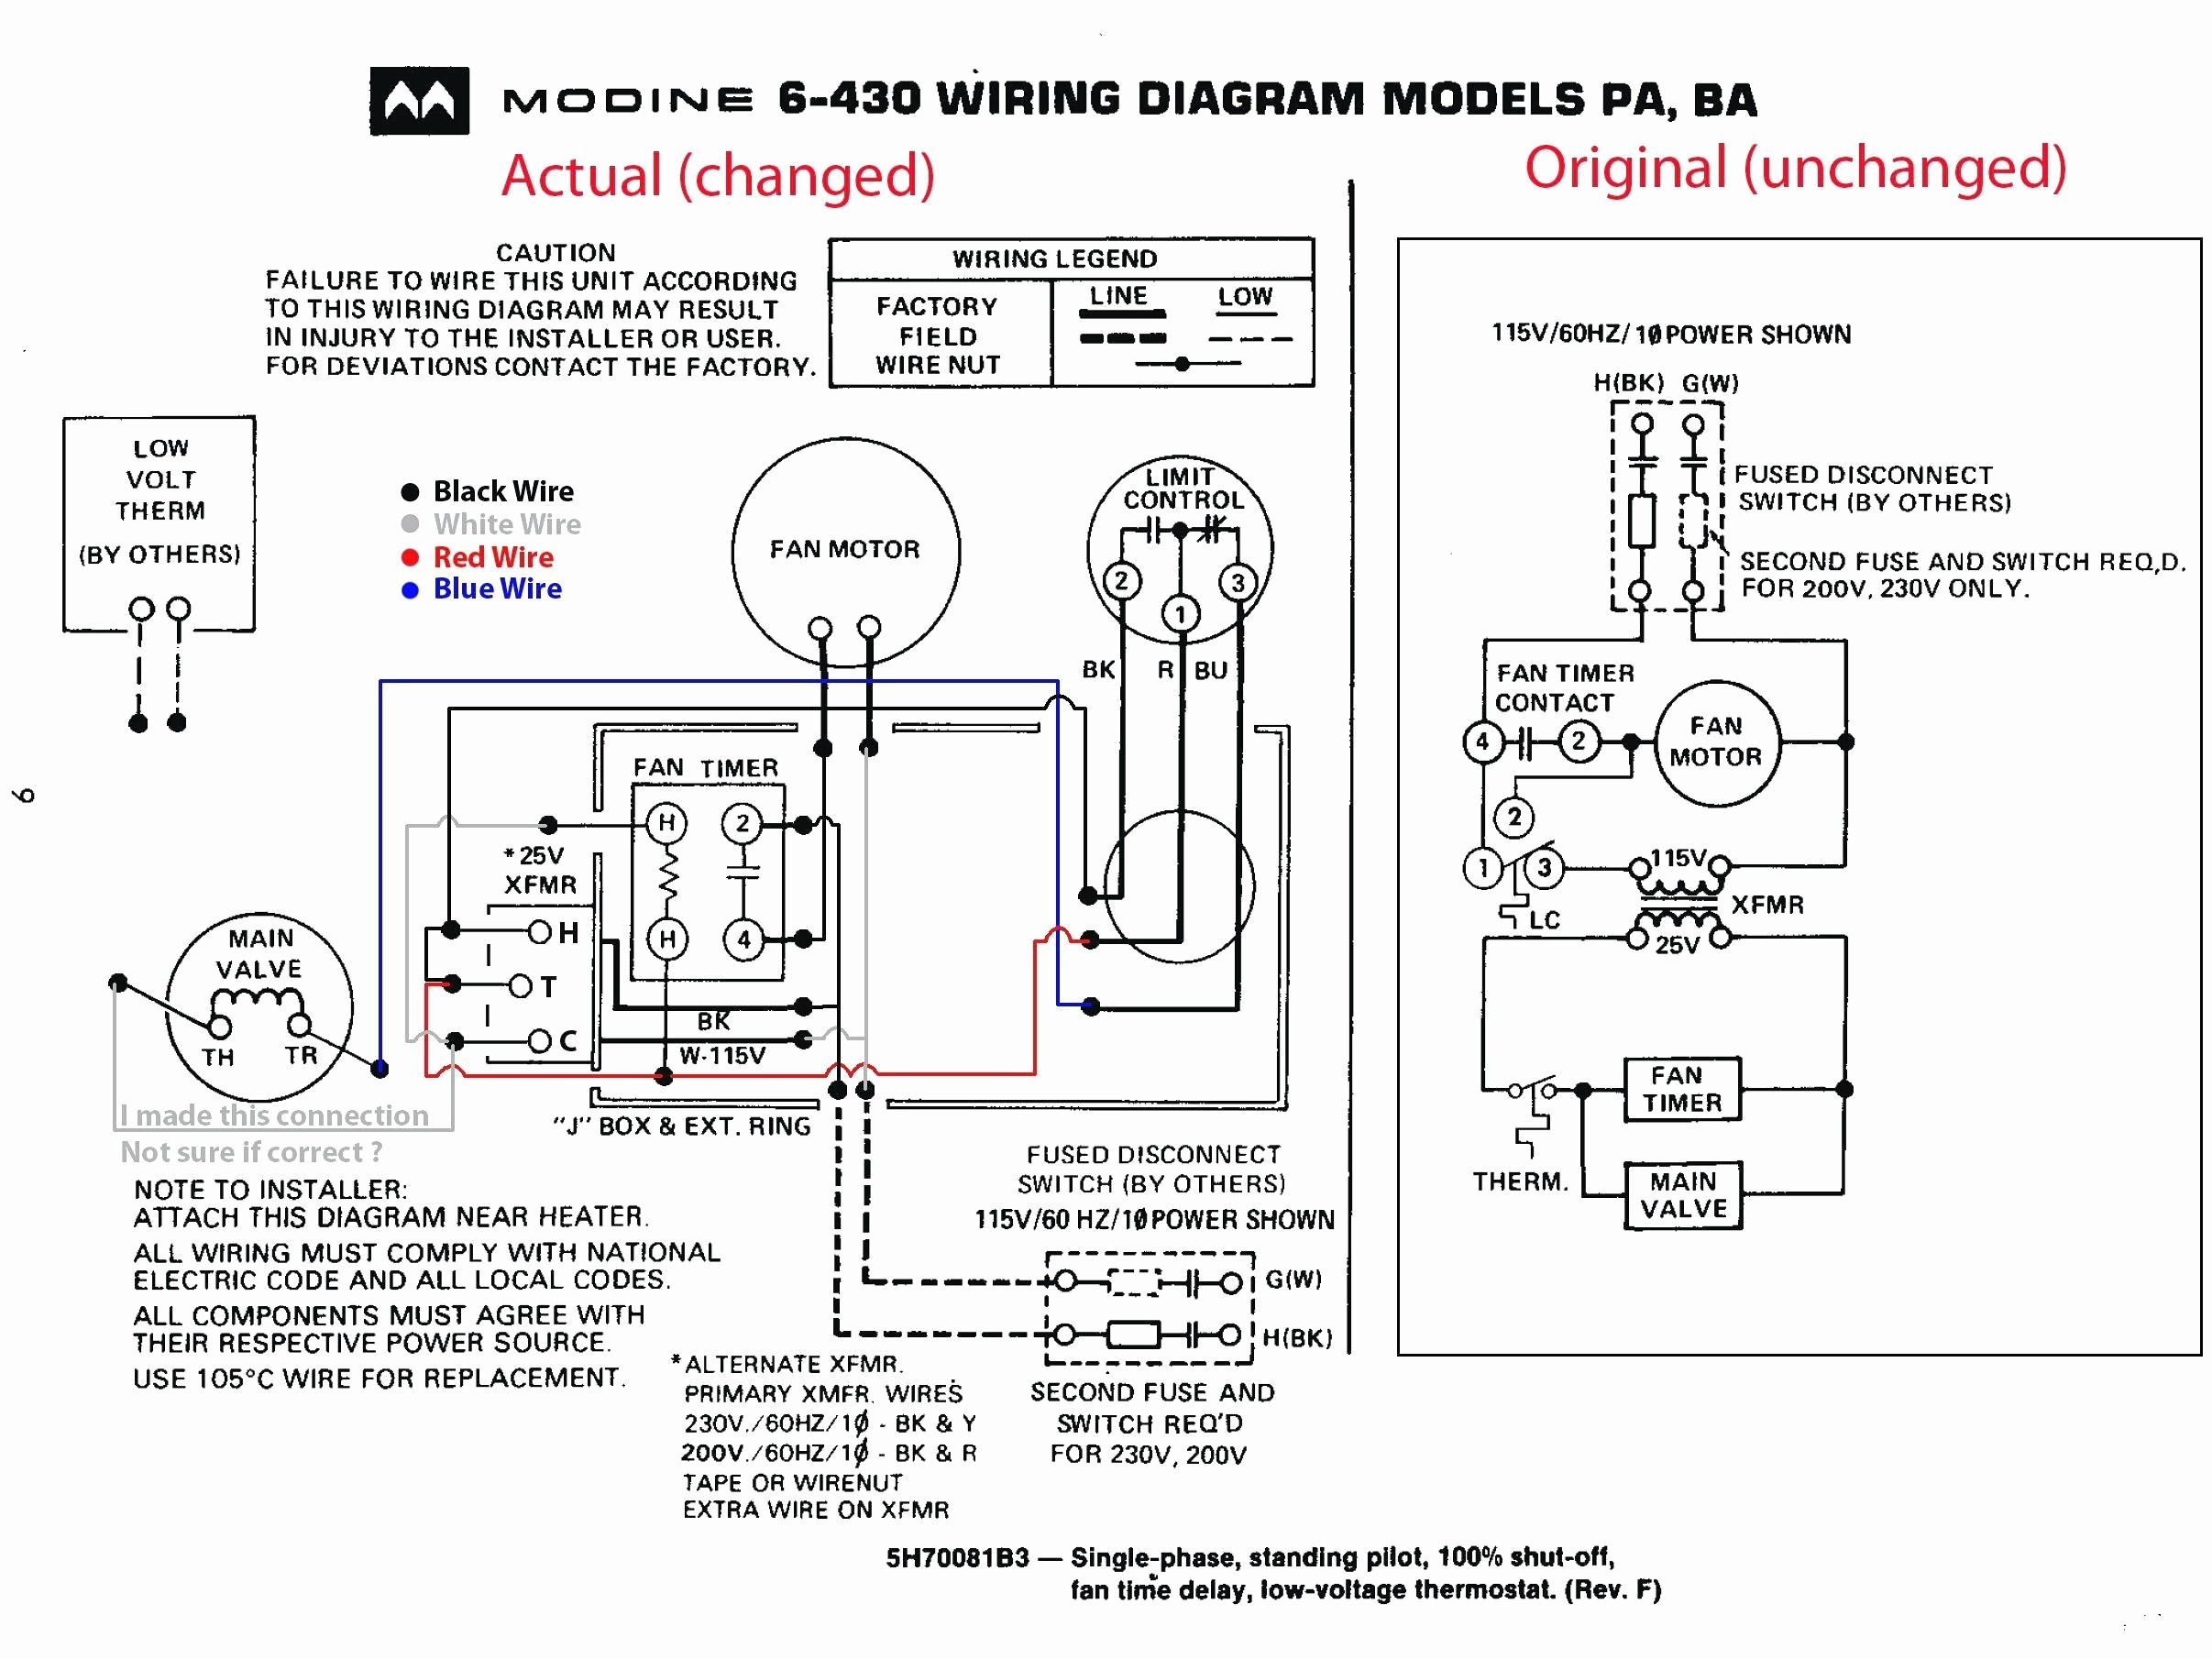 Wiring Diagram for Inverter Charger New Wiring Diagram for Inverter New Wiring Diagram Rv Wiring Diagram